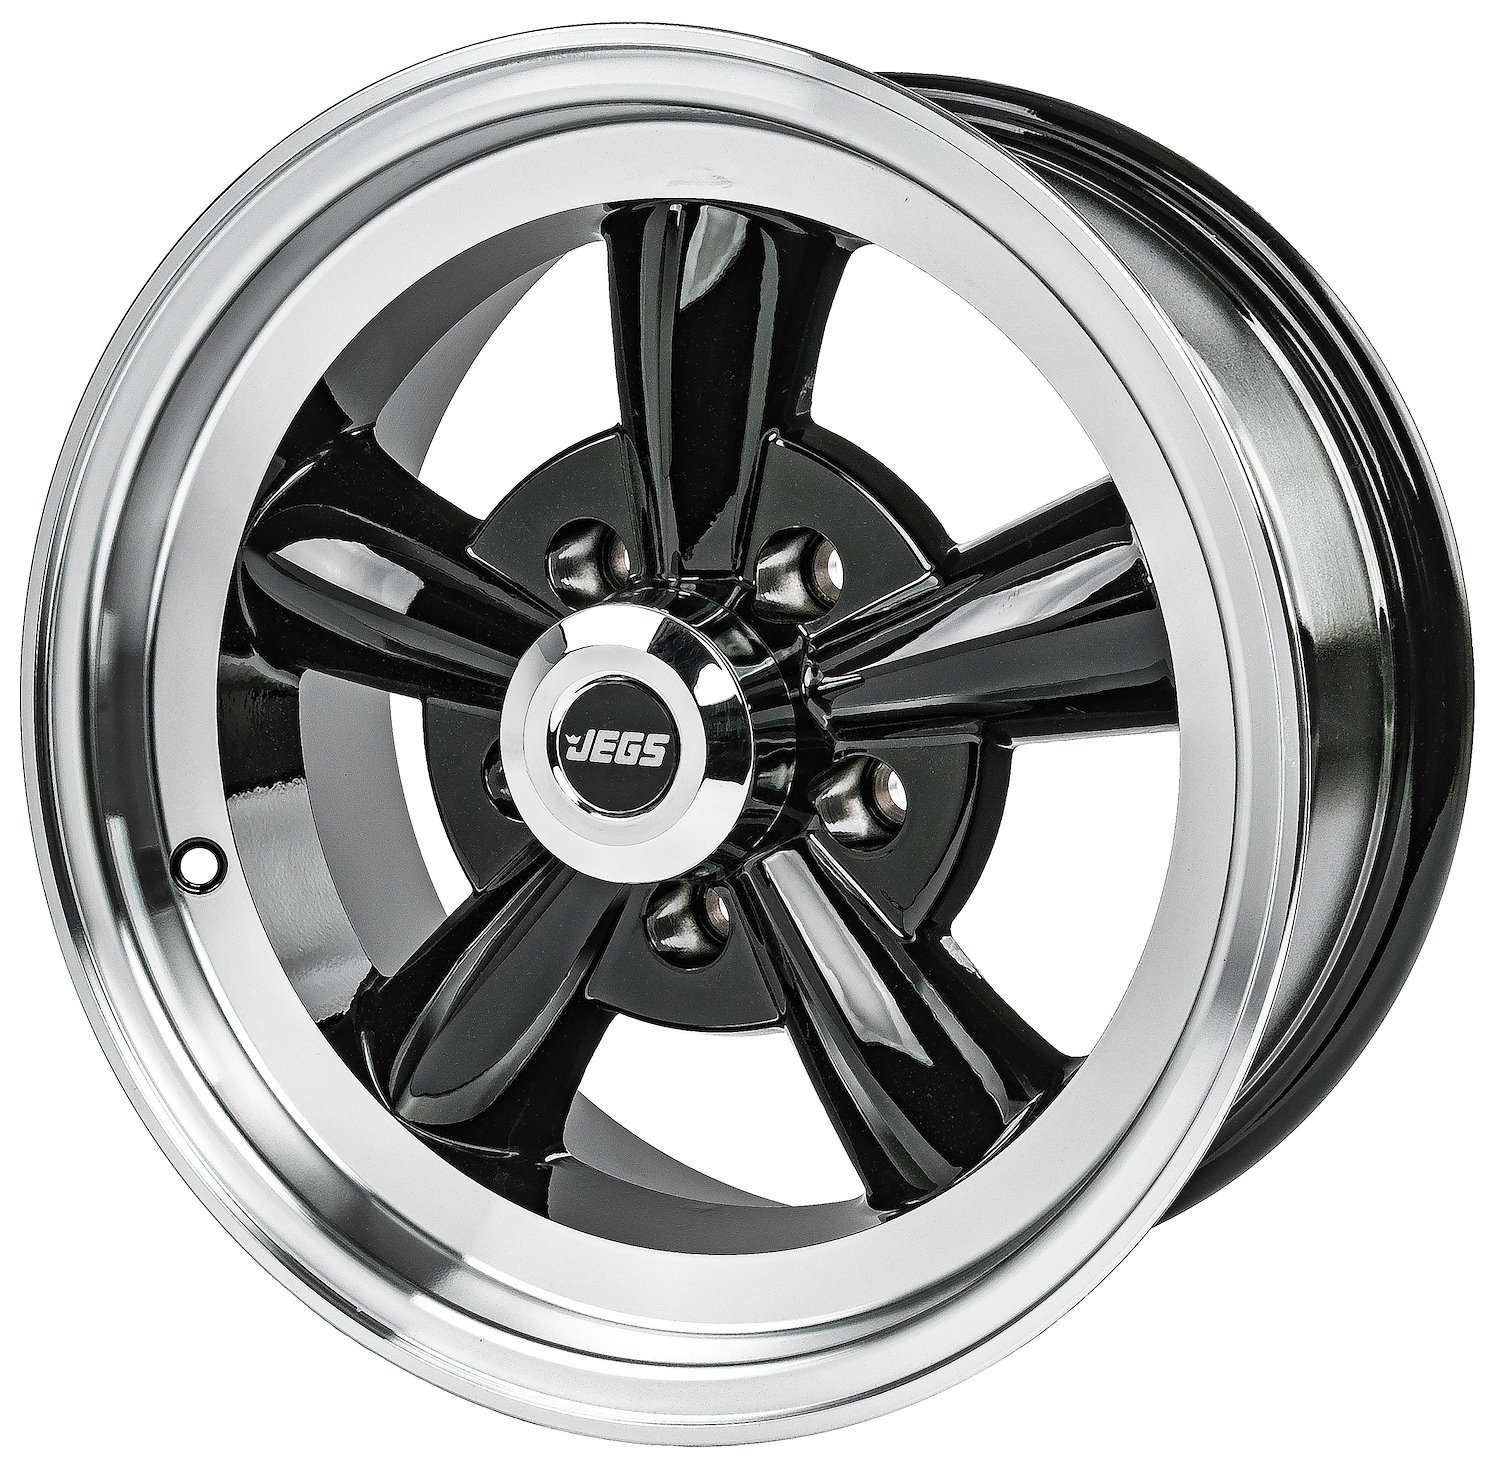 JEGS 670104 15” x 7” Sport Torque Wheel with Polished Outer Lip, Gloss Black Spokes, and Chrome